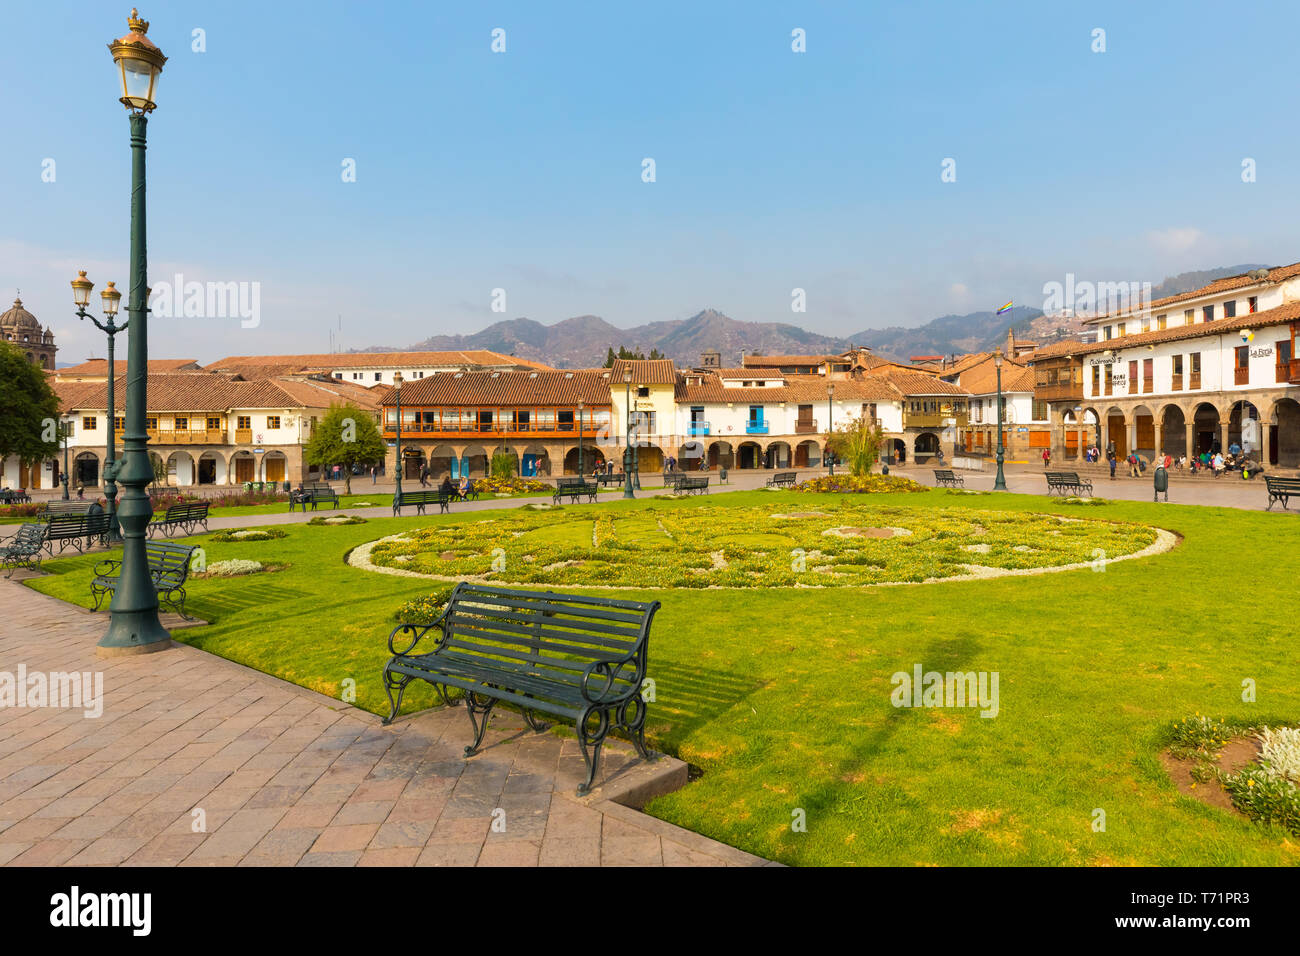 Parade Ground garden and historic buildings of Cuzco at sunse Stock Photo